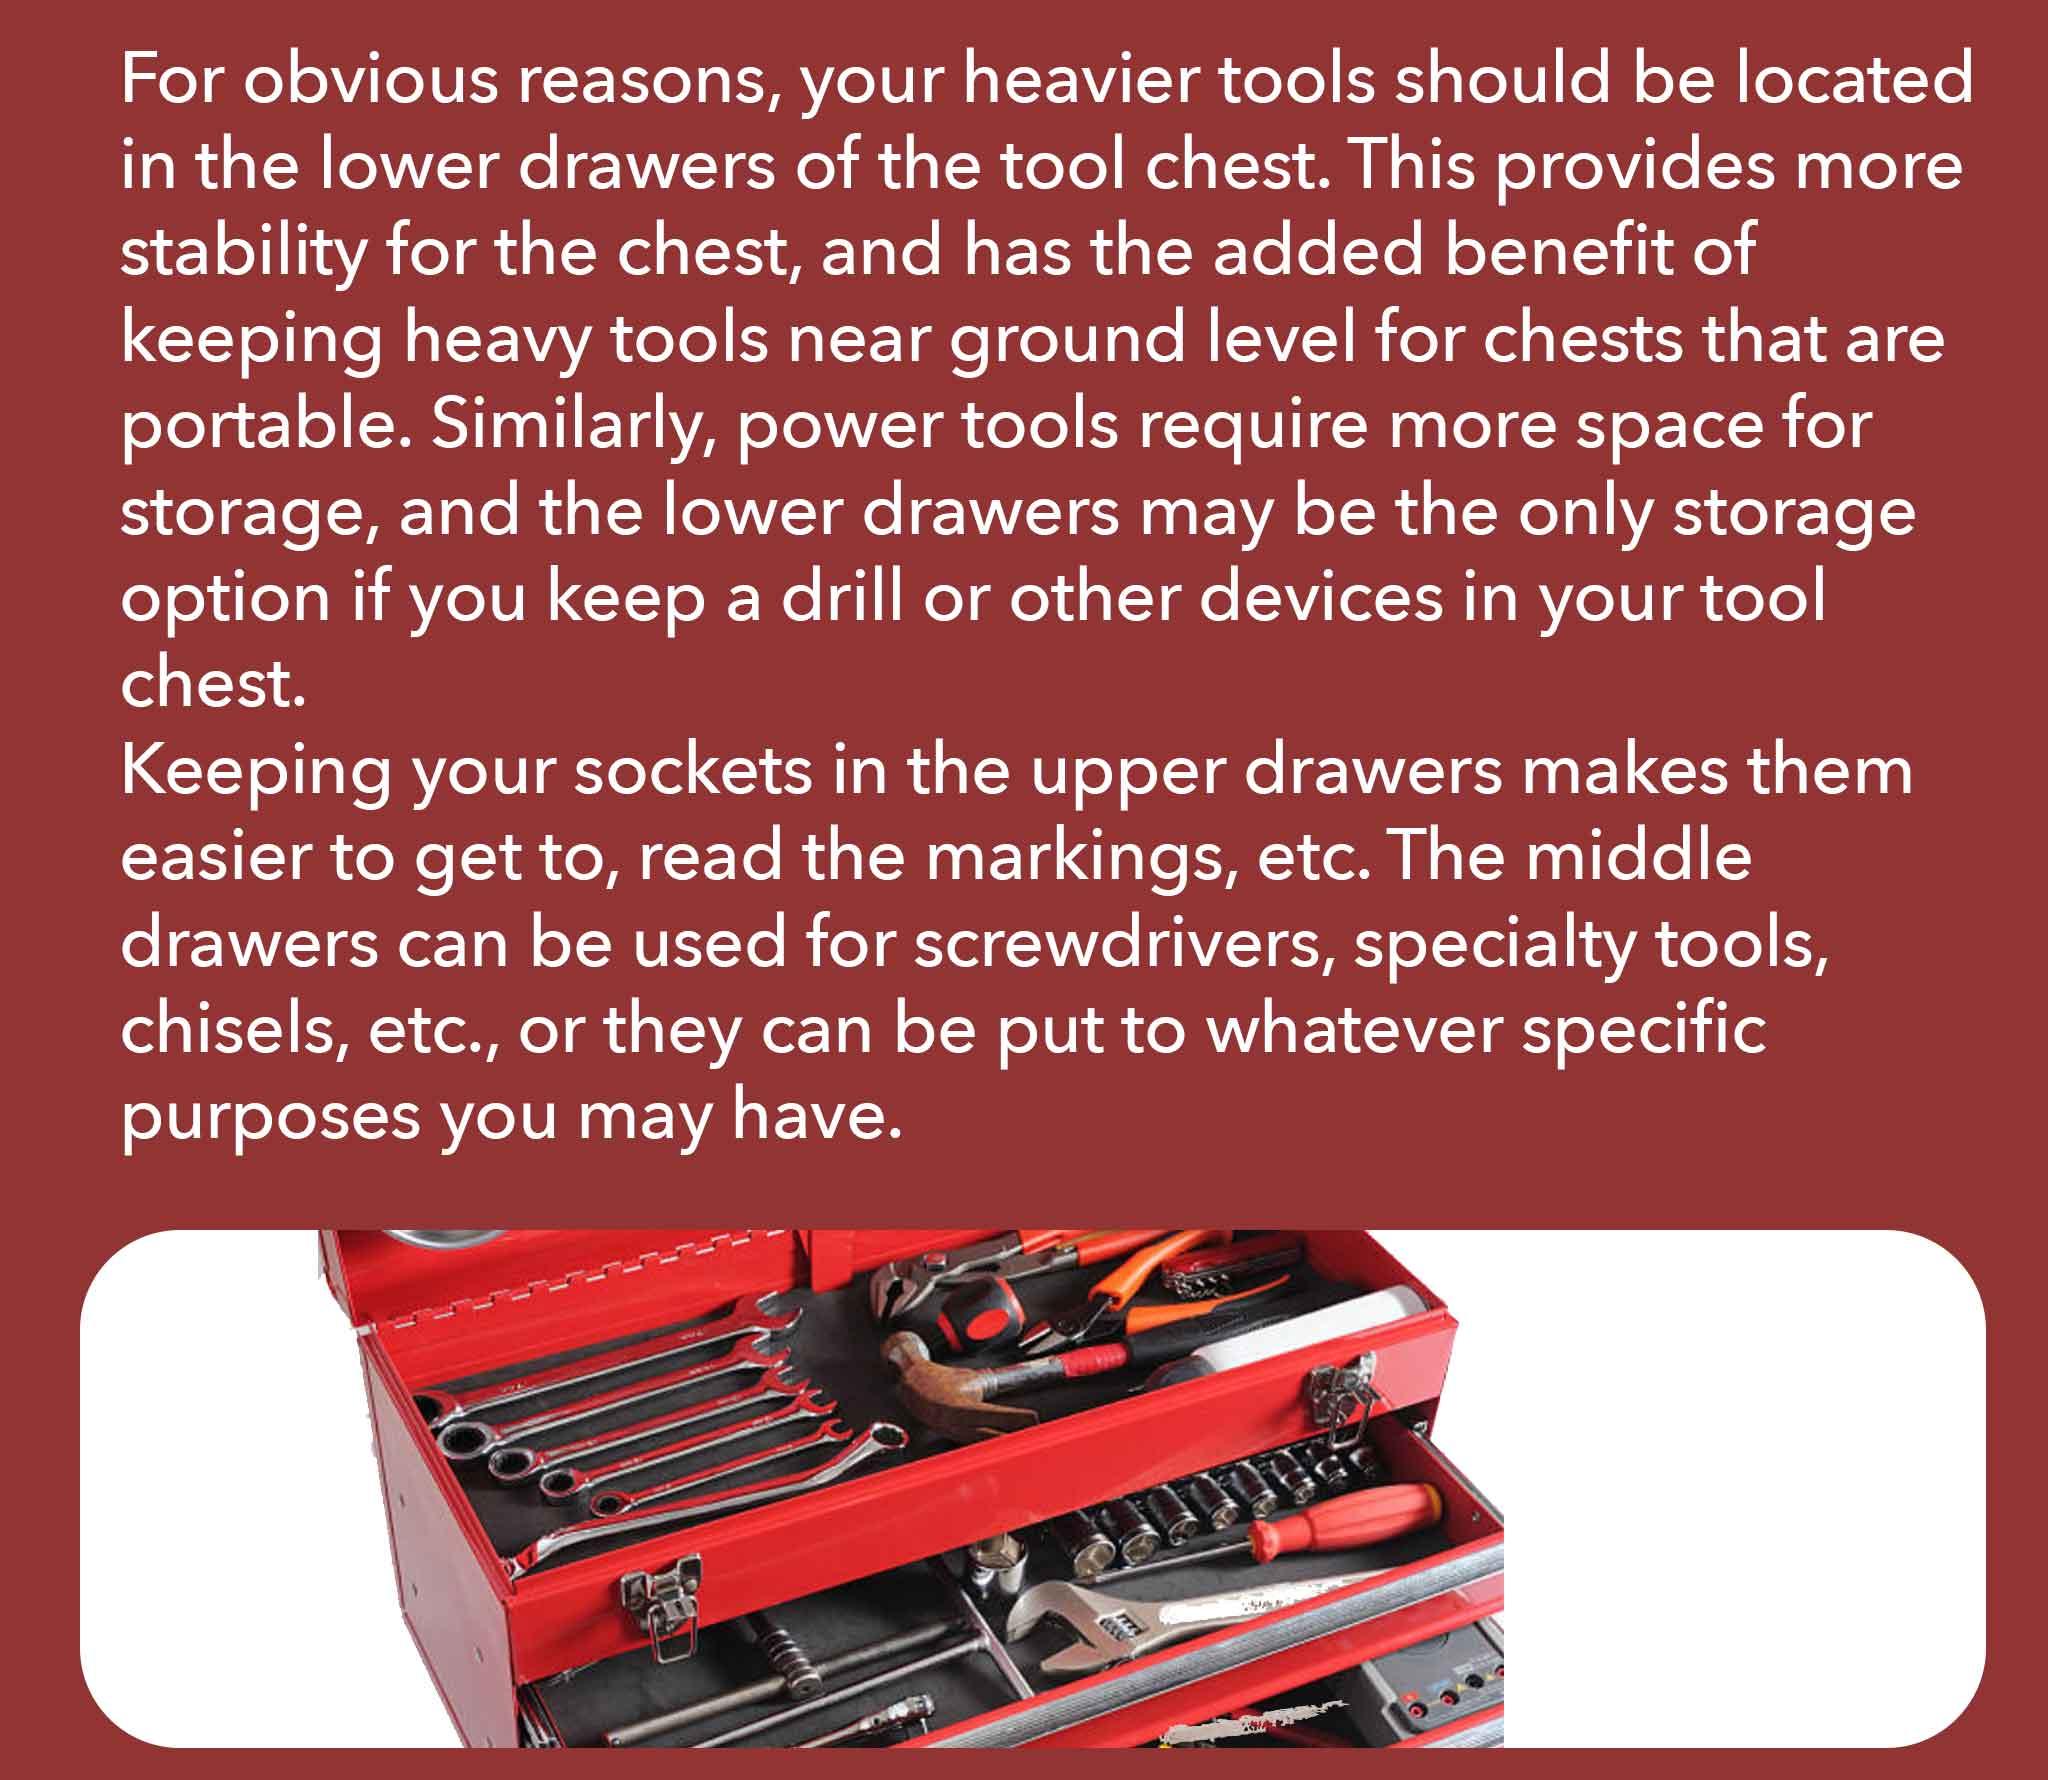 For obvious reasons, your heavier tools should be located in the lower drawers of the tool chest. This provides more stability for the chest, and has the added benefit of keeping heavy tools near ground level for chests that are portable. Similarly, power tools require more space for storage, and the lower drawers may be the only storage option if you keep a drill or other devices in your tool chest. Keeping your sockets in the upper drawers makes them easier to get to, read the markings, etc. The middle drawers can be used for screwdrivers, specialty tools, chisels, etc., or they can be put to whatever specific purposes you may have.